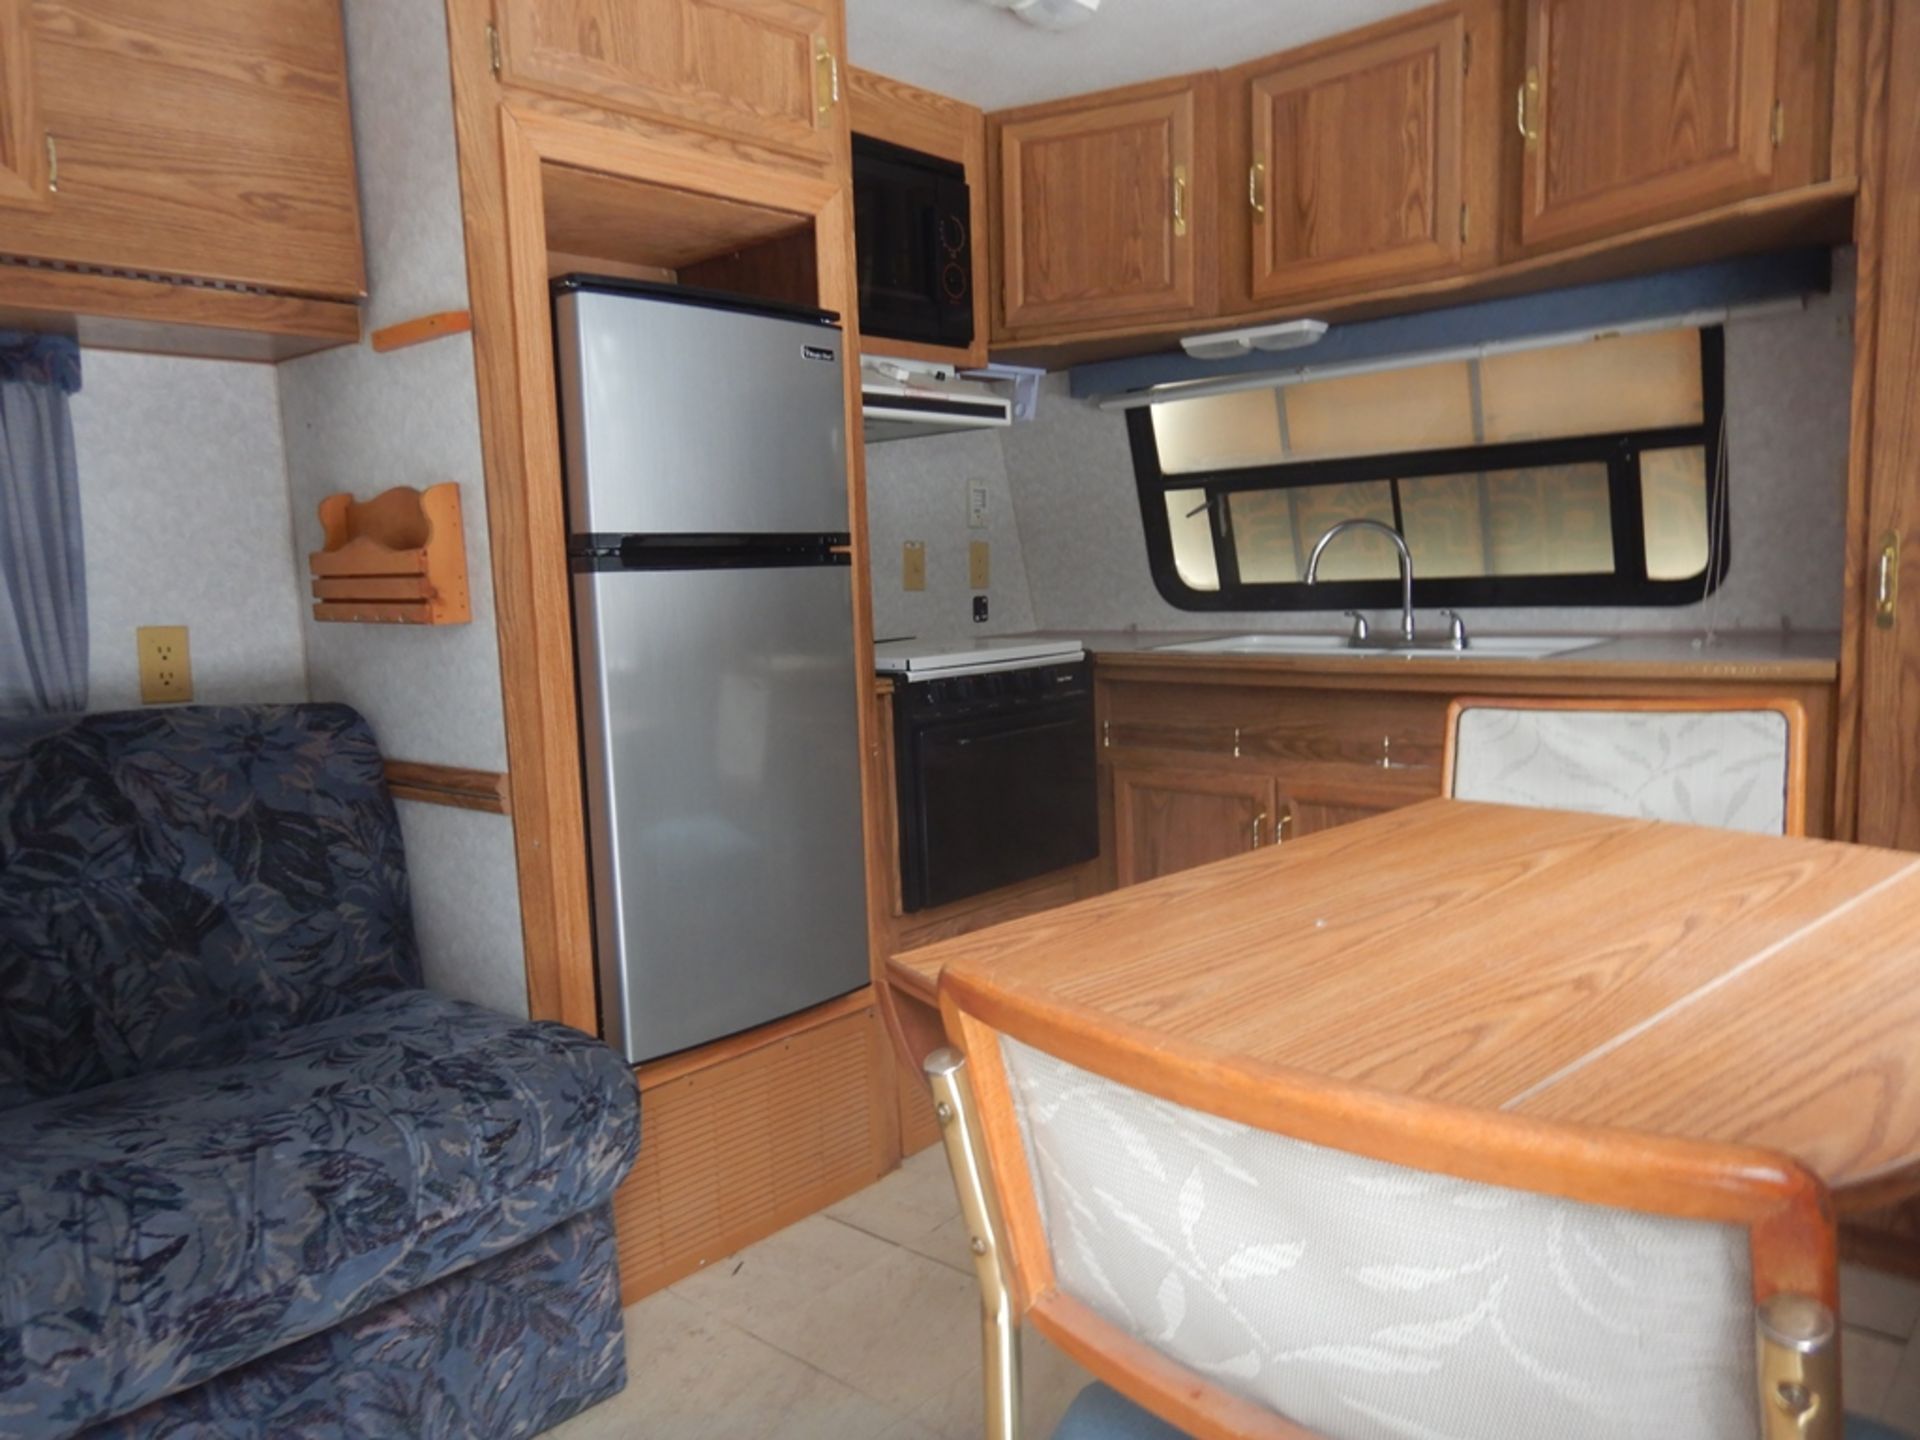 1994 WILDERNESS 26T T/A RECREATIONAL TRAILER, 26FT A/C, FRIDGE, STOVE, MICROWAVE, BUILT-IN SOUND - Image 3 of 4